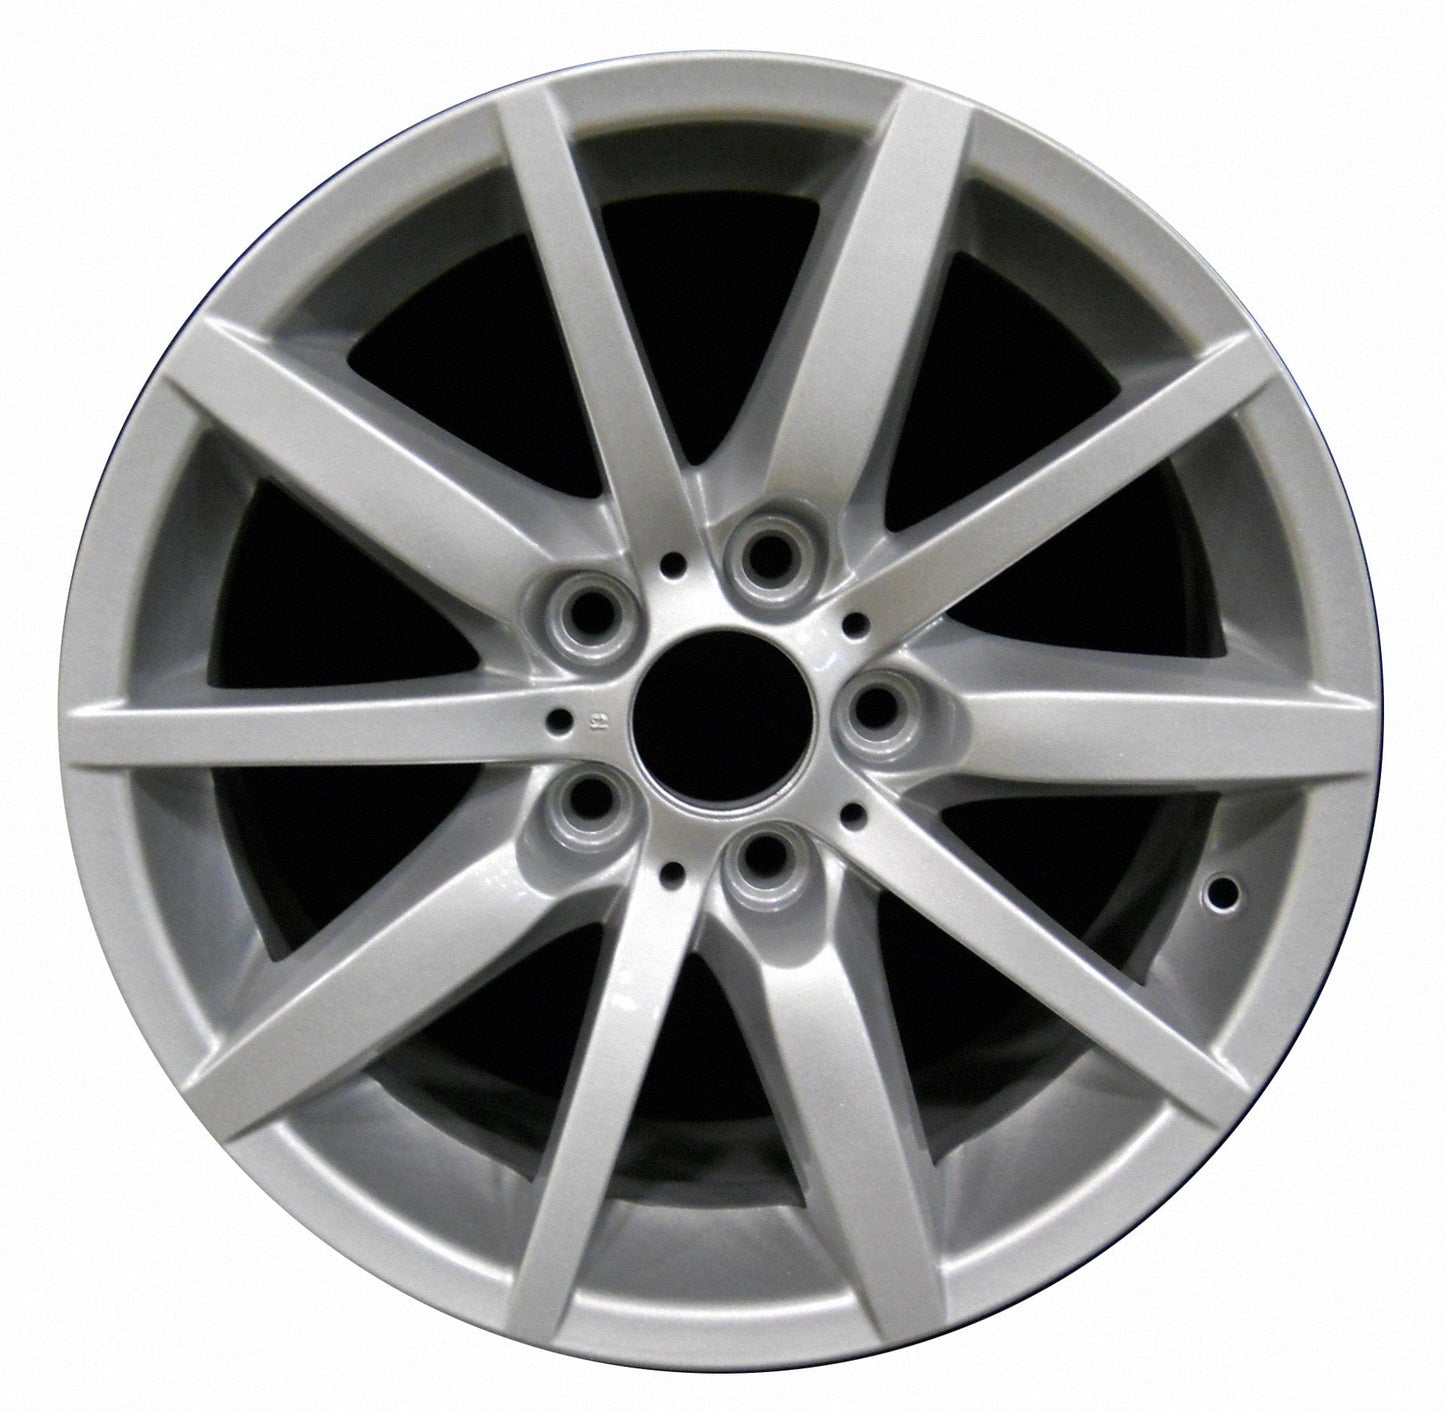 BMW 323i  2008, 2009, 2010, 2011, 2012 Factory OEM Car Wheel Size 17x8 Alloy WAO.71316FT.PS14.FF